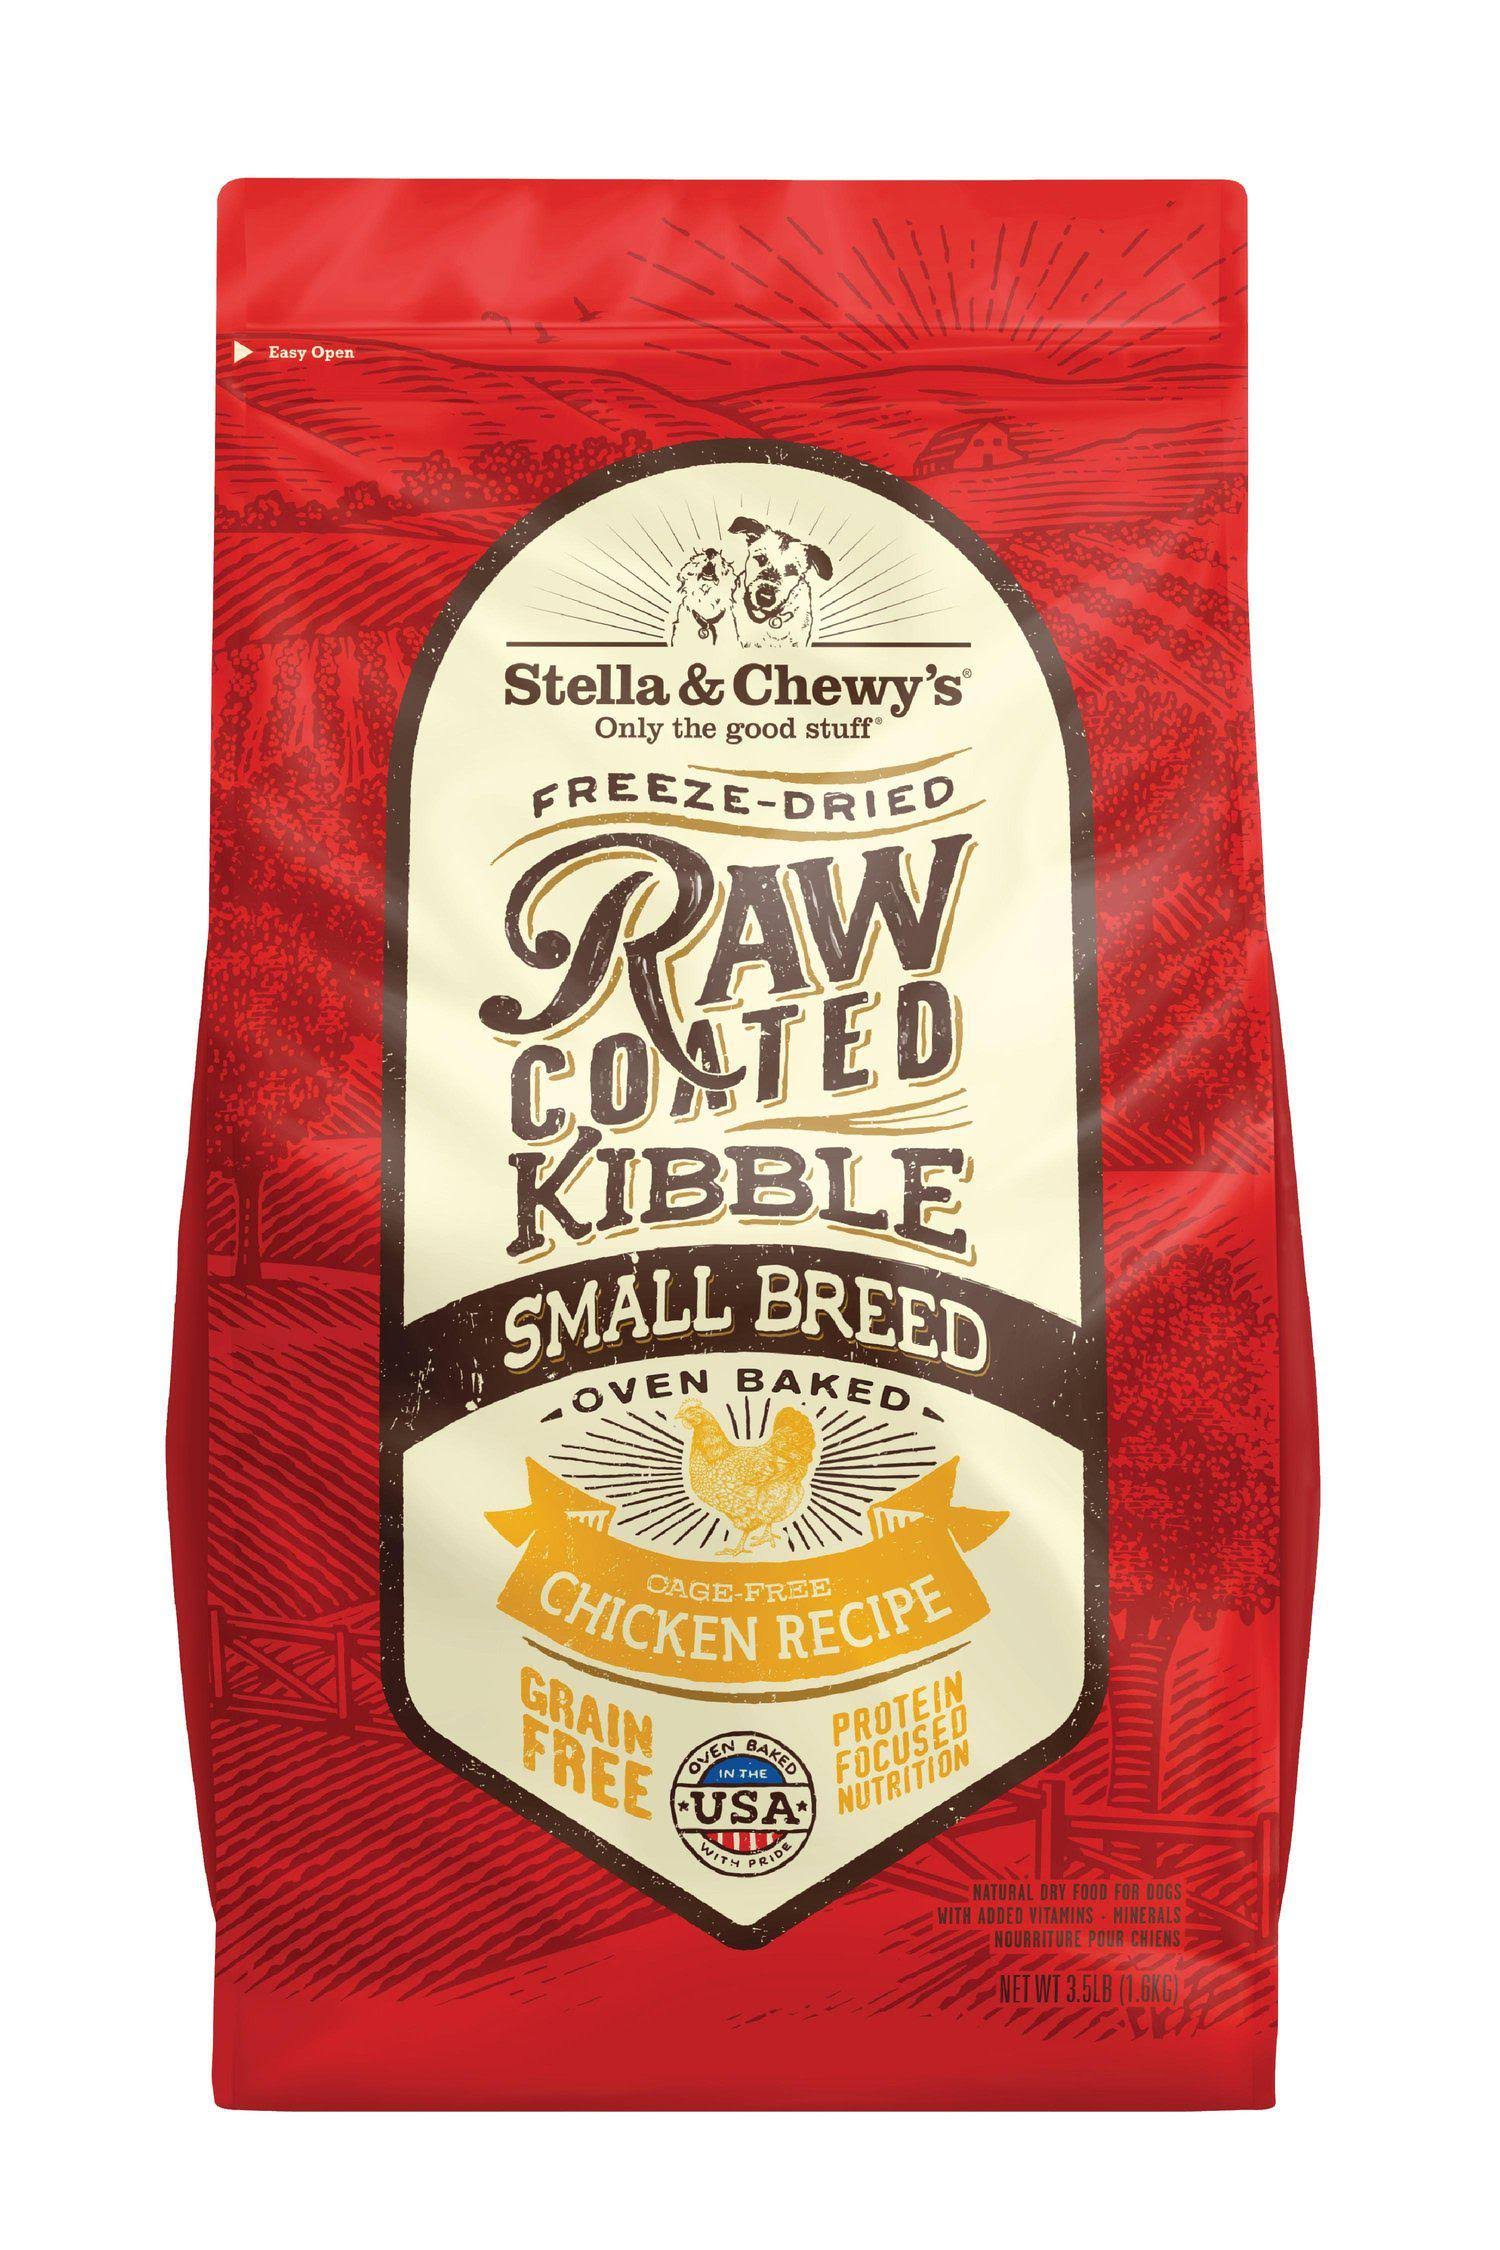 Stella & Chewy's Raw Coated Kibble Cage-Free Chicken Recipe Small Breed Grain-Free Dry Dog Food